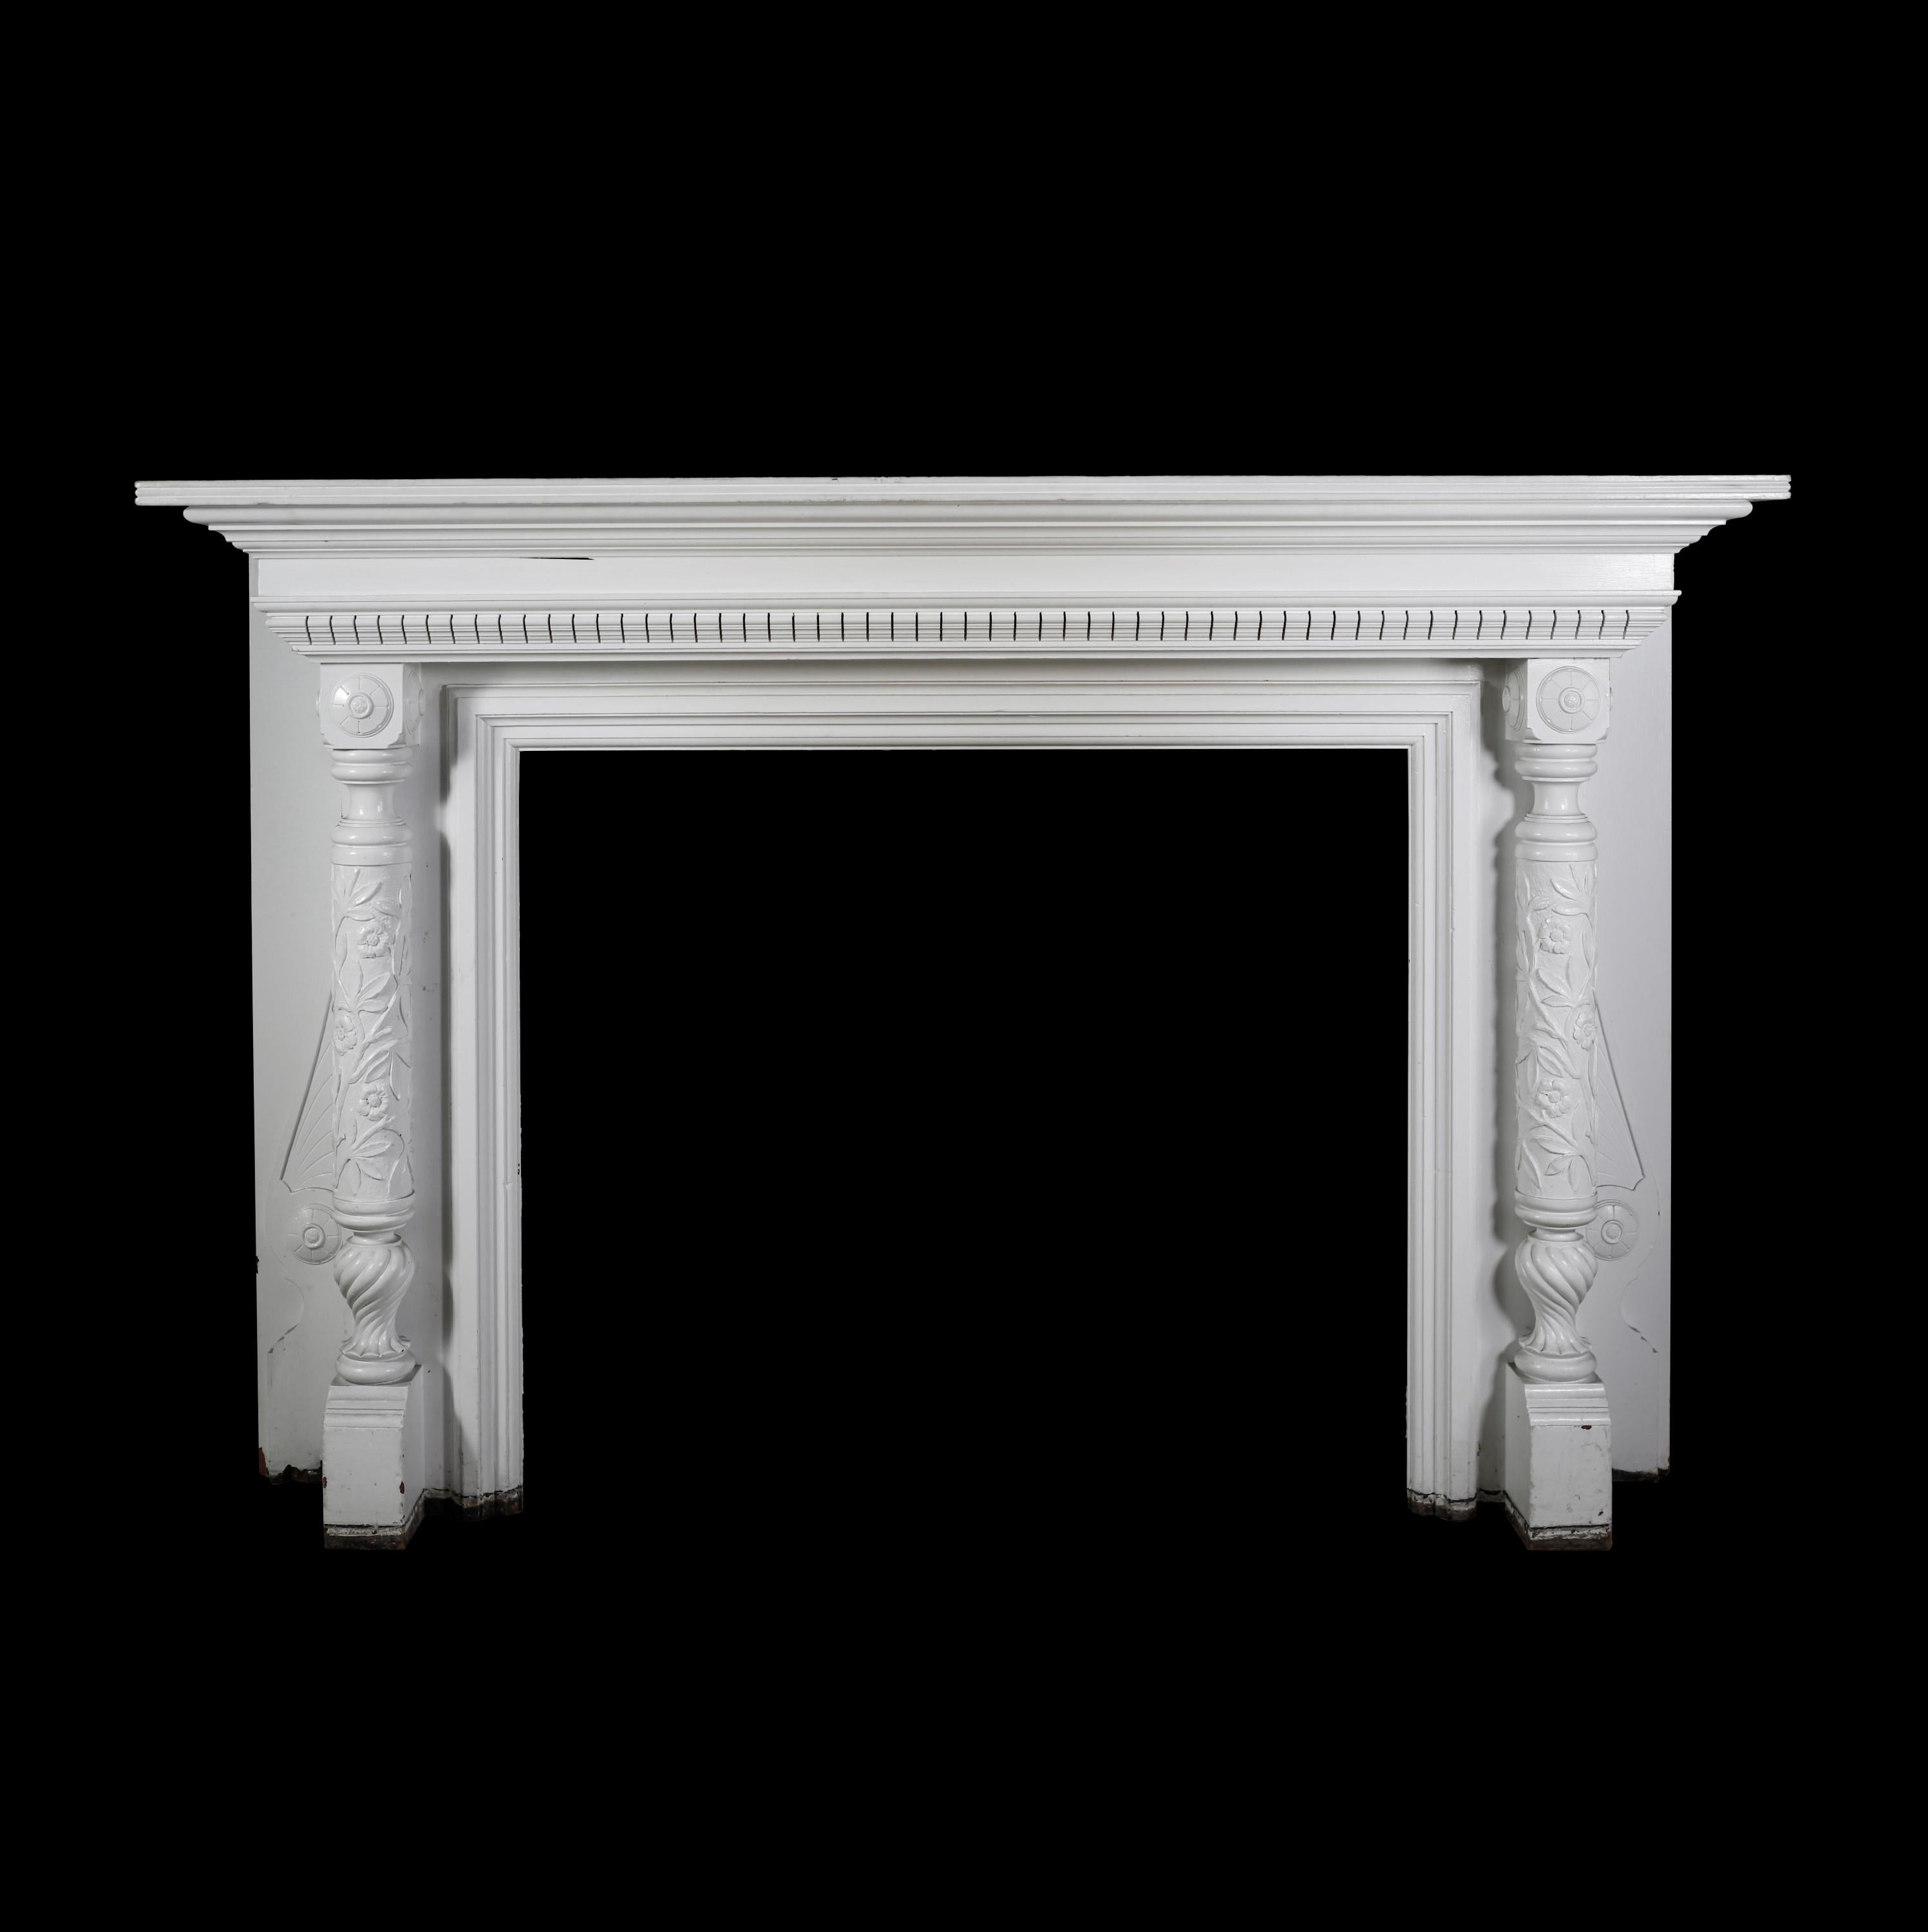 Victorian white painted solid wood mantel with dentil shelf crown molding and floral foliate carvings on the plinths. There is a repair on the back left of the shelf. Please note, this item is located in our Scranton, PA location